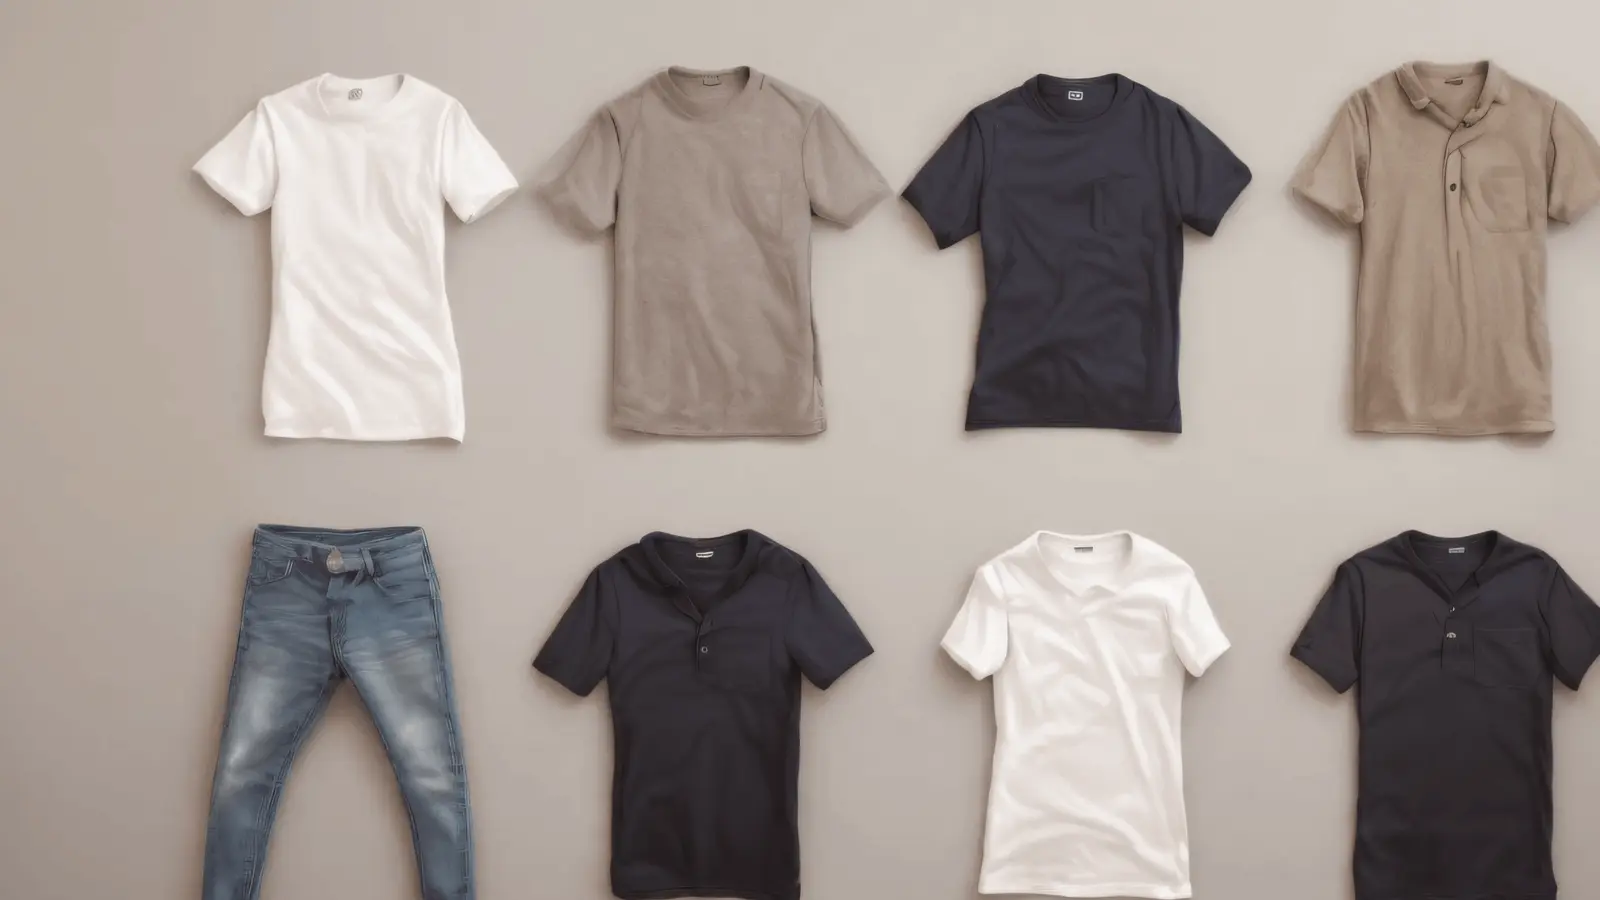 Image with seven t-shirts and a pair of jeans in a minimalist way representing the minimalism of a capsule wardrobe or capsule closer